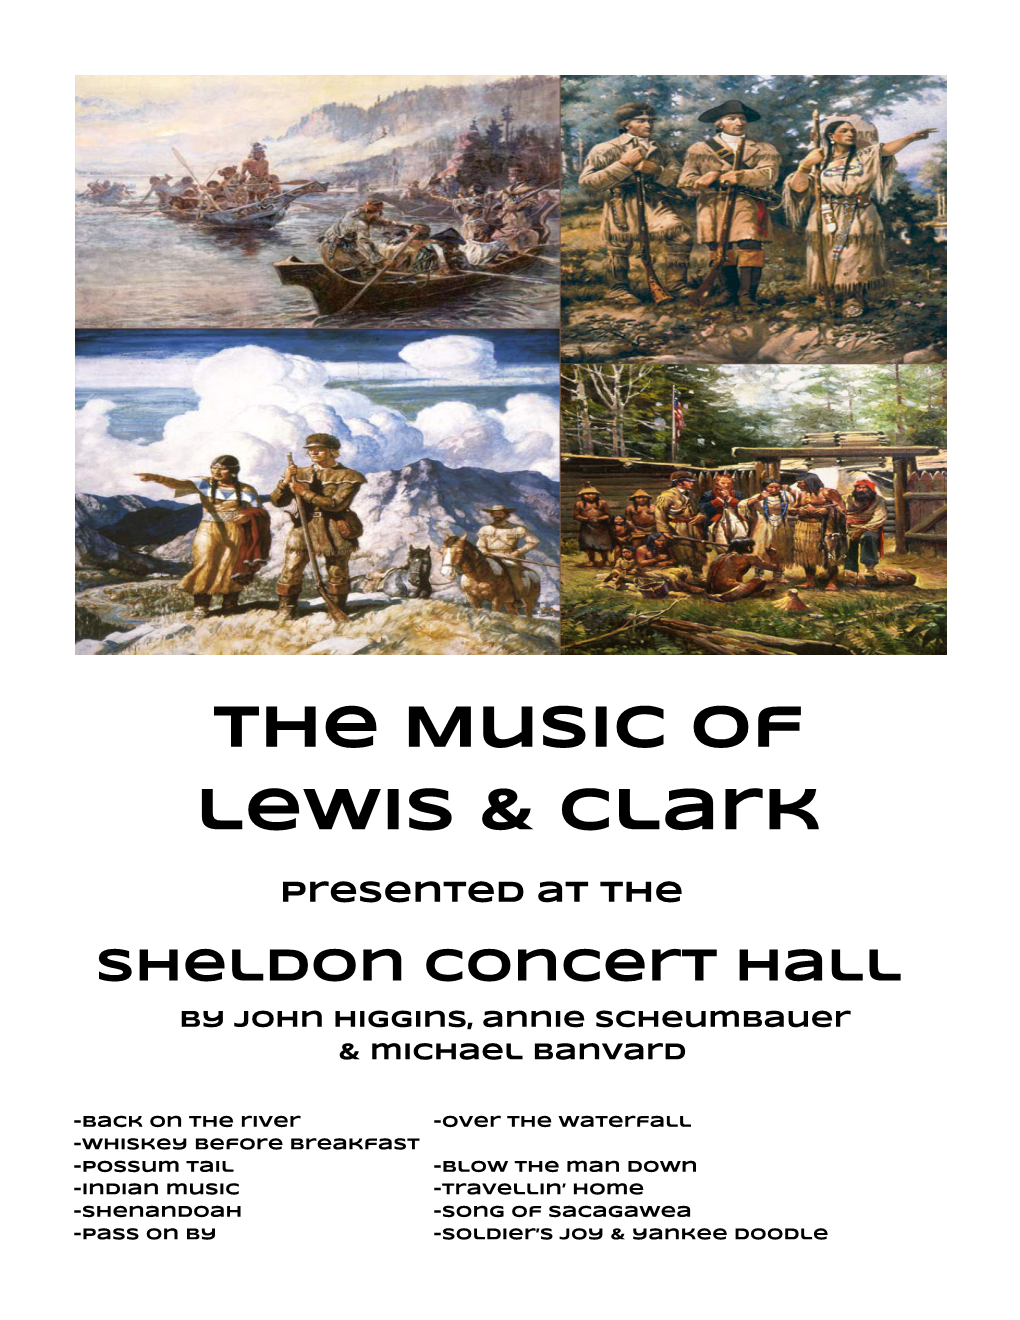 The Music of Lewis & Clark